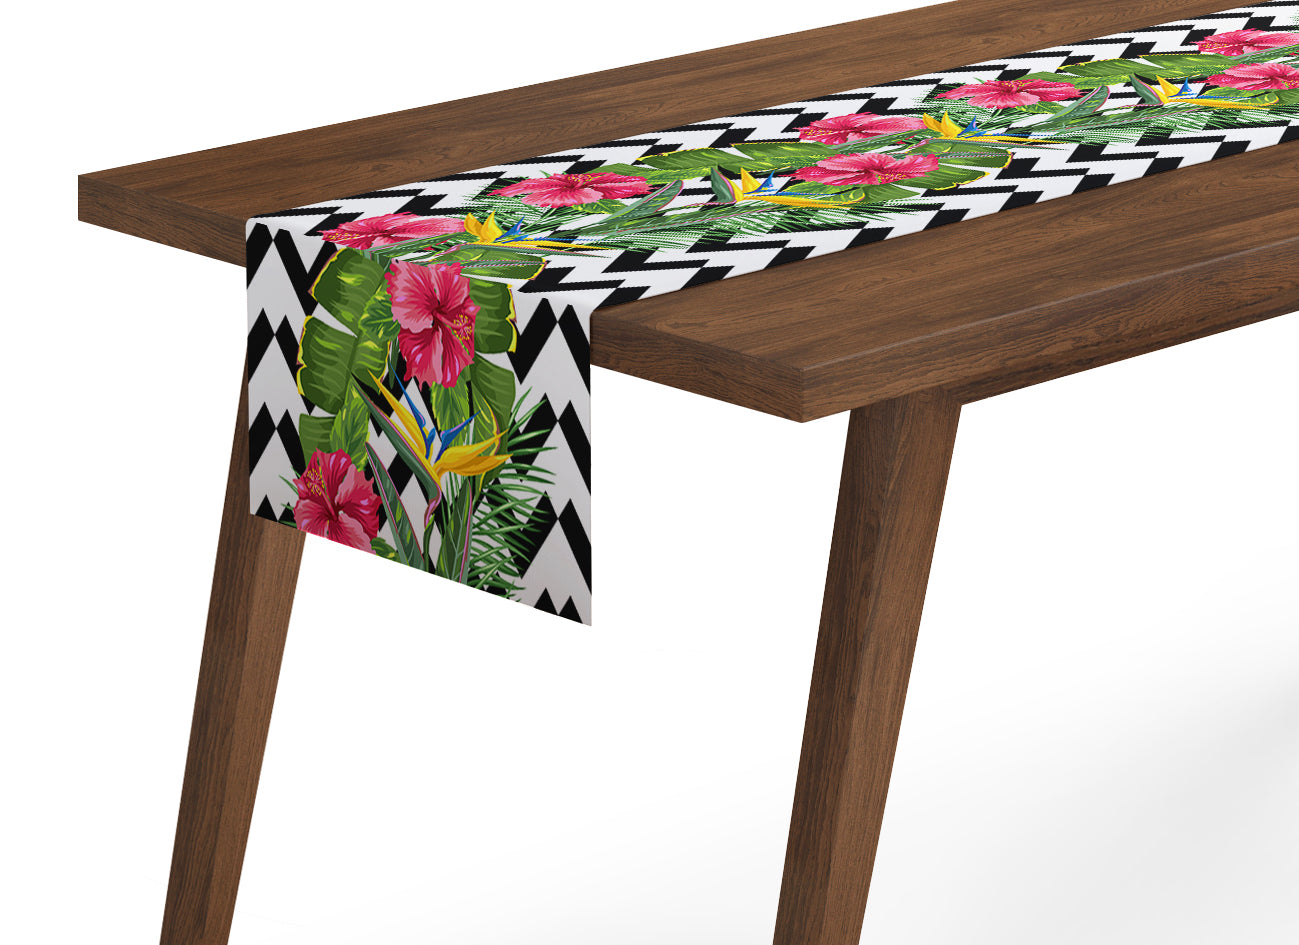 Table Runner Tropical Leaves and Hibiscus Flowers - Wellmira